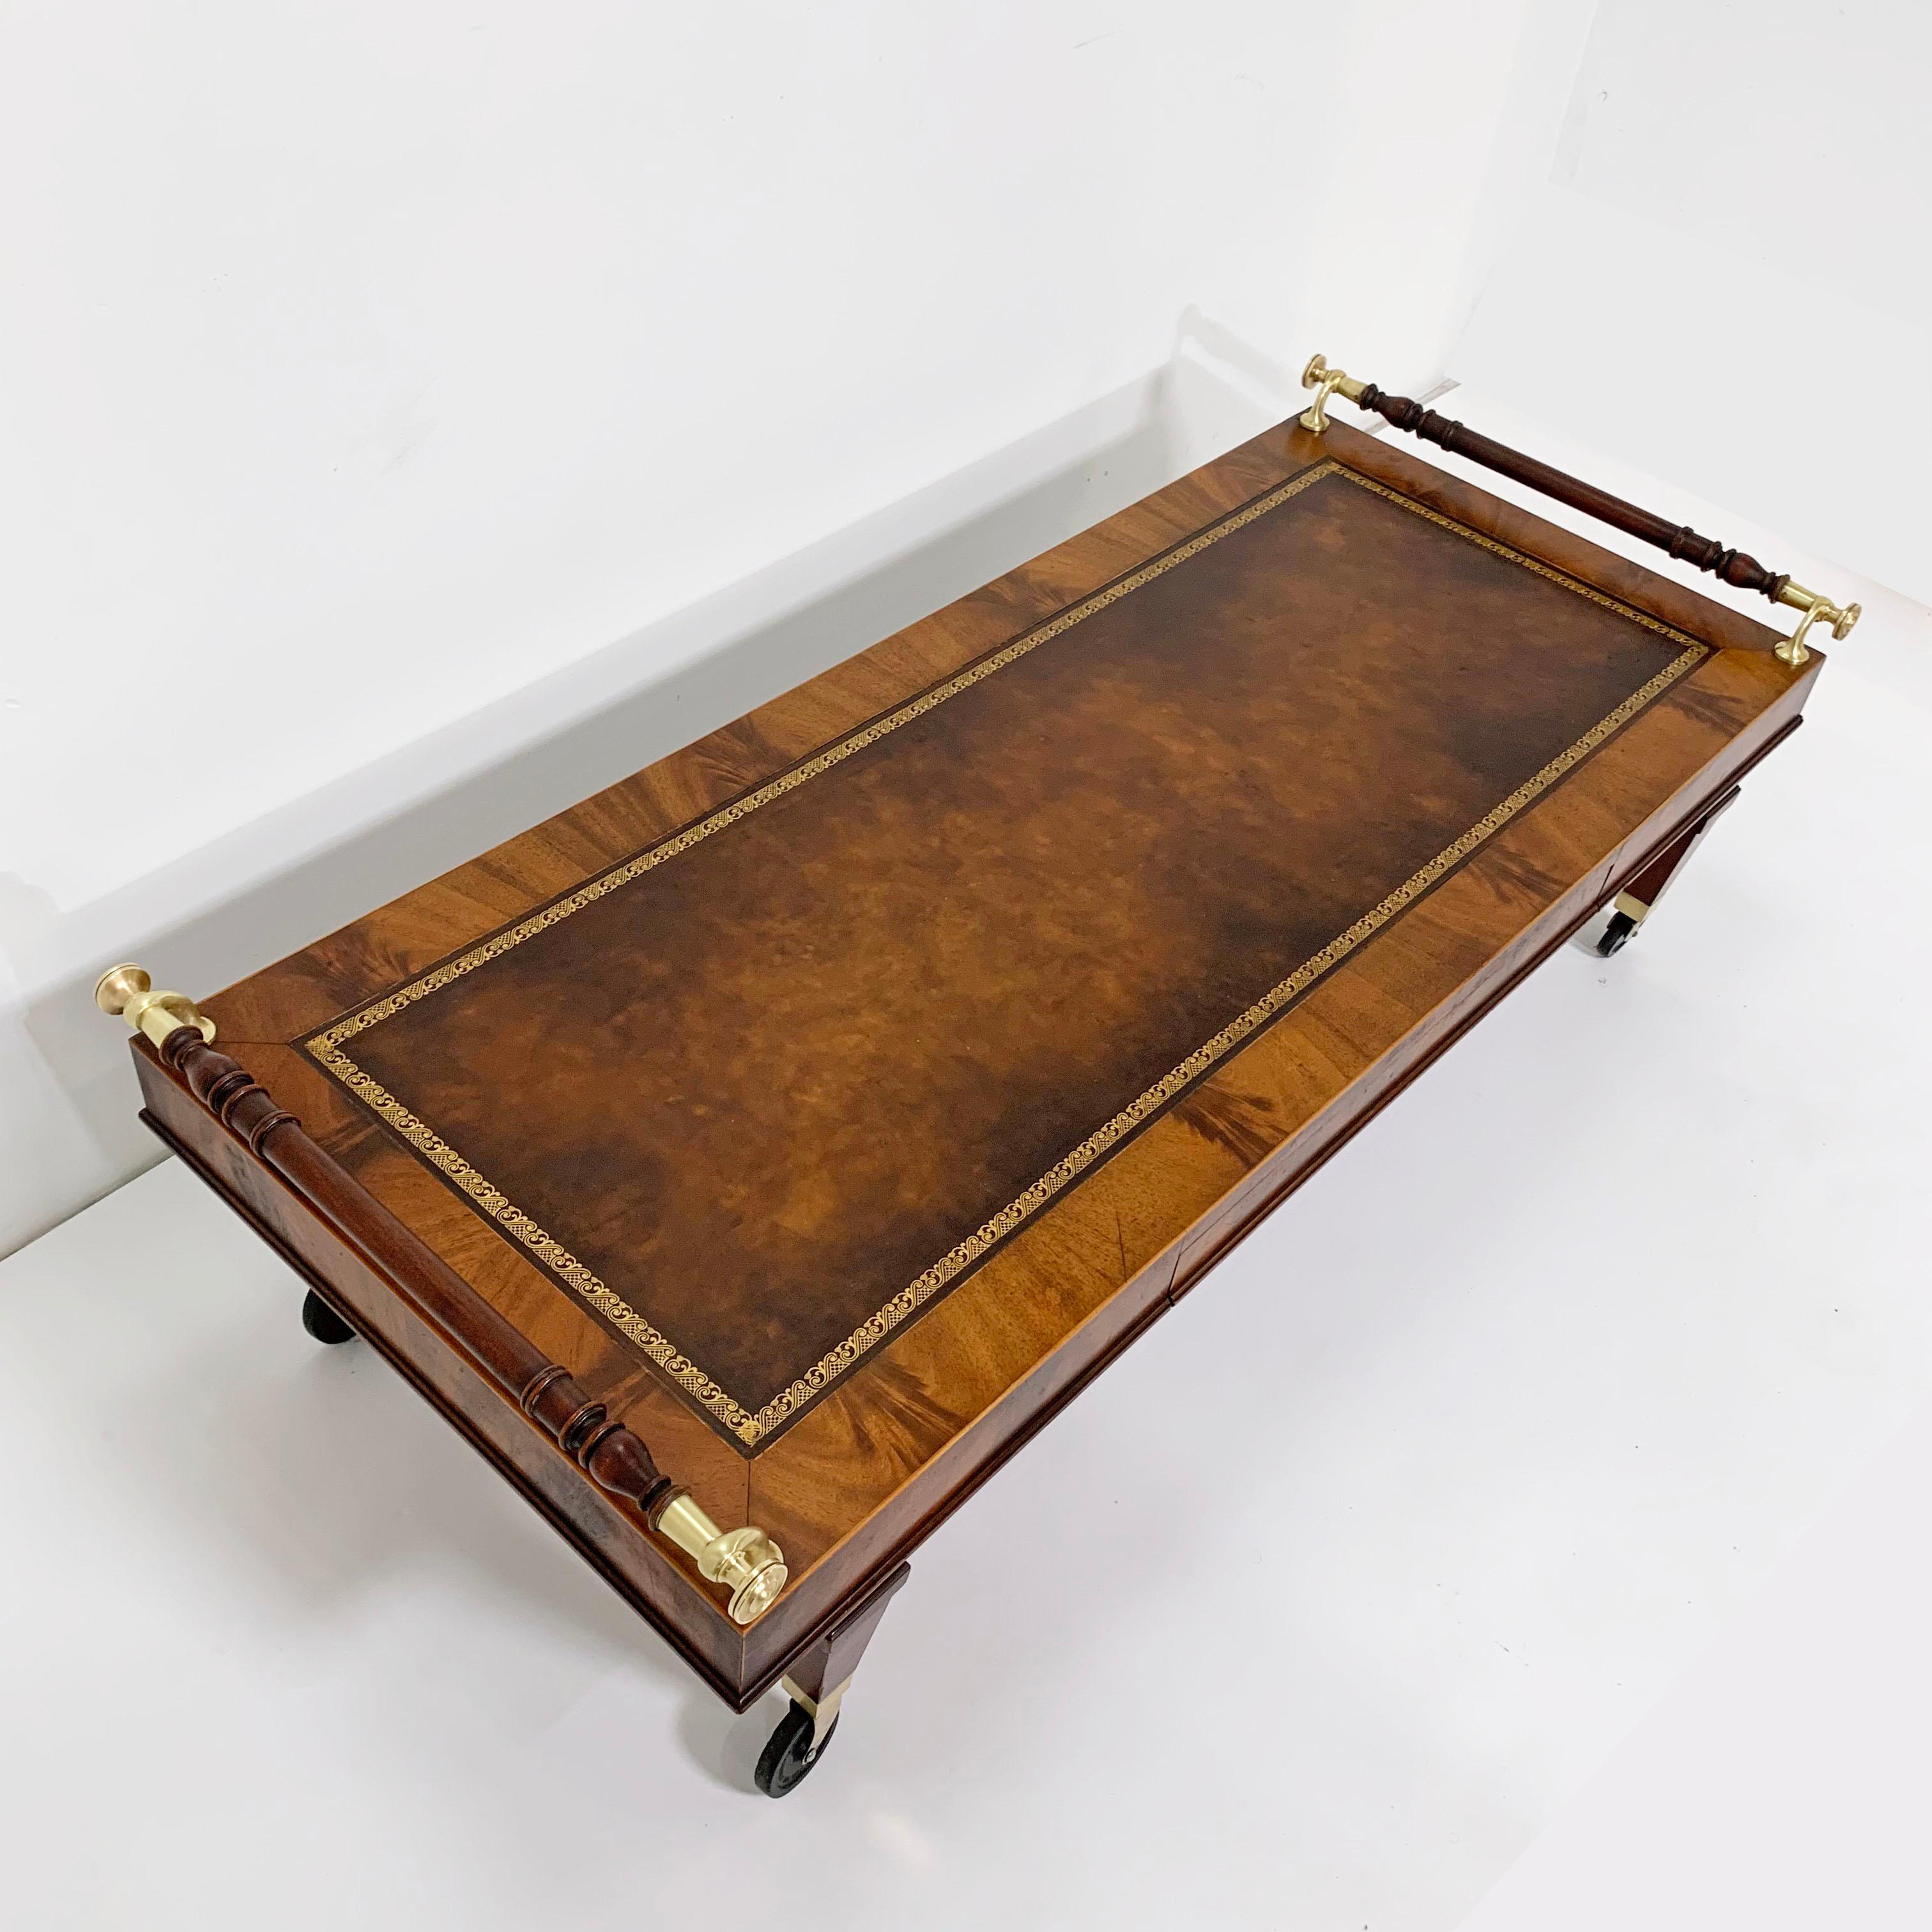 American Rare Weiman Regency Style Coffee Table with Leather Top and Brass Rails